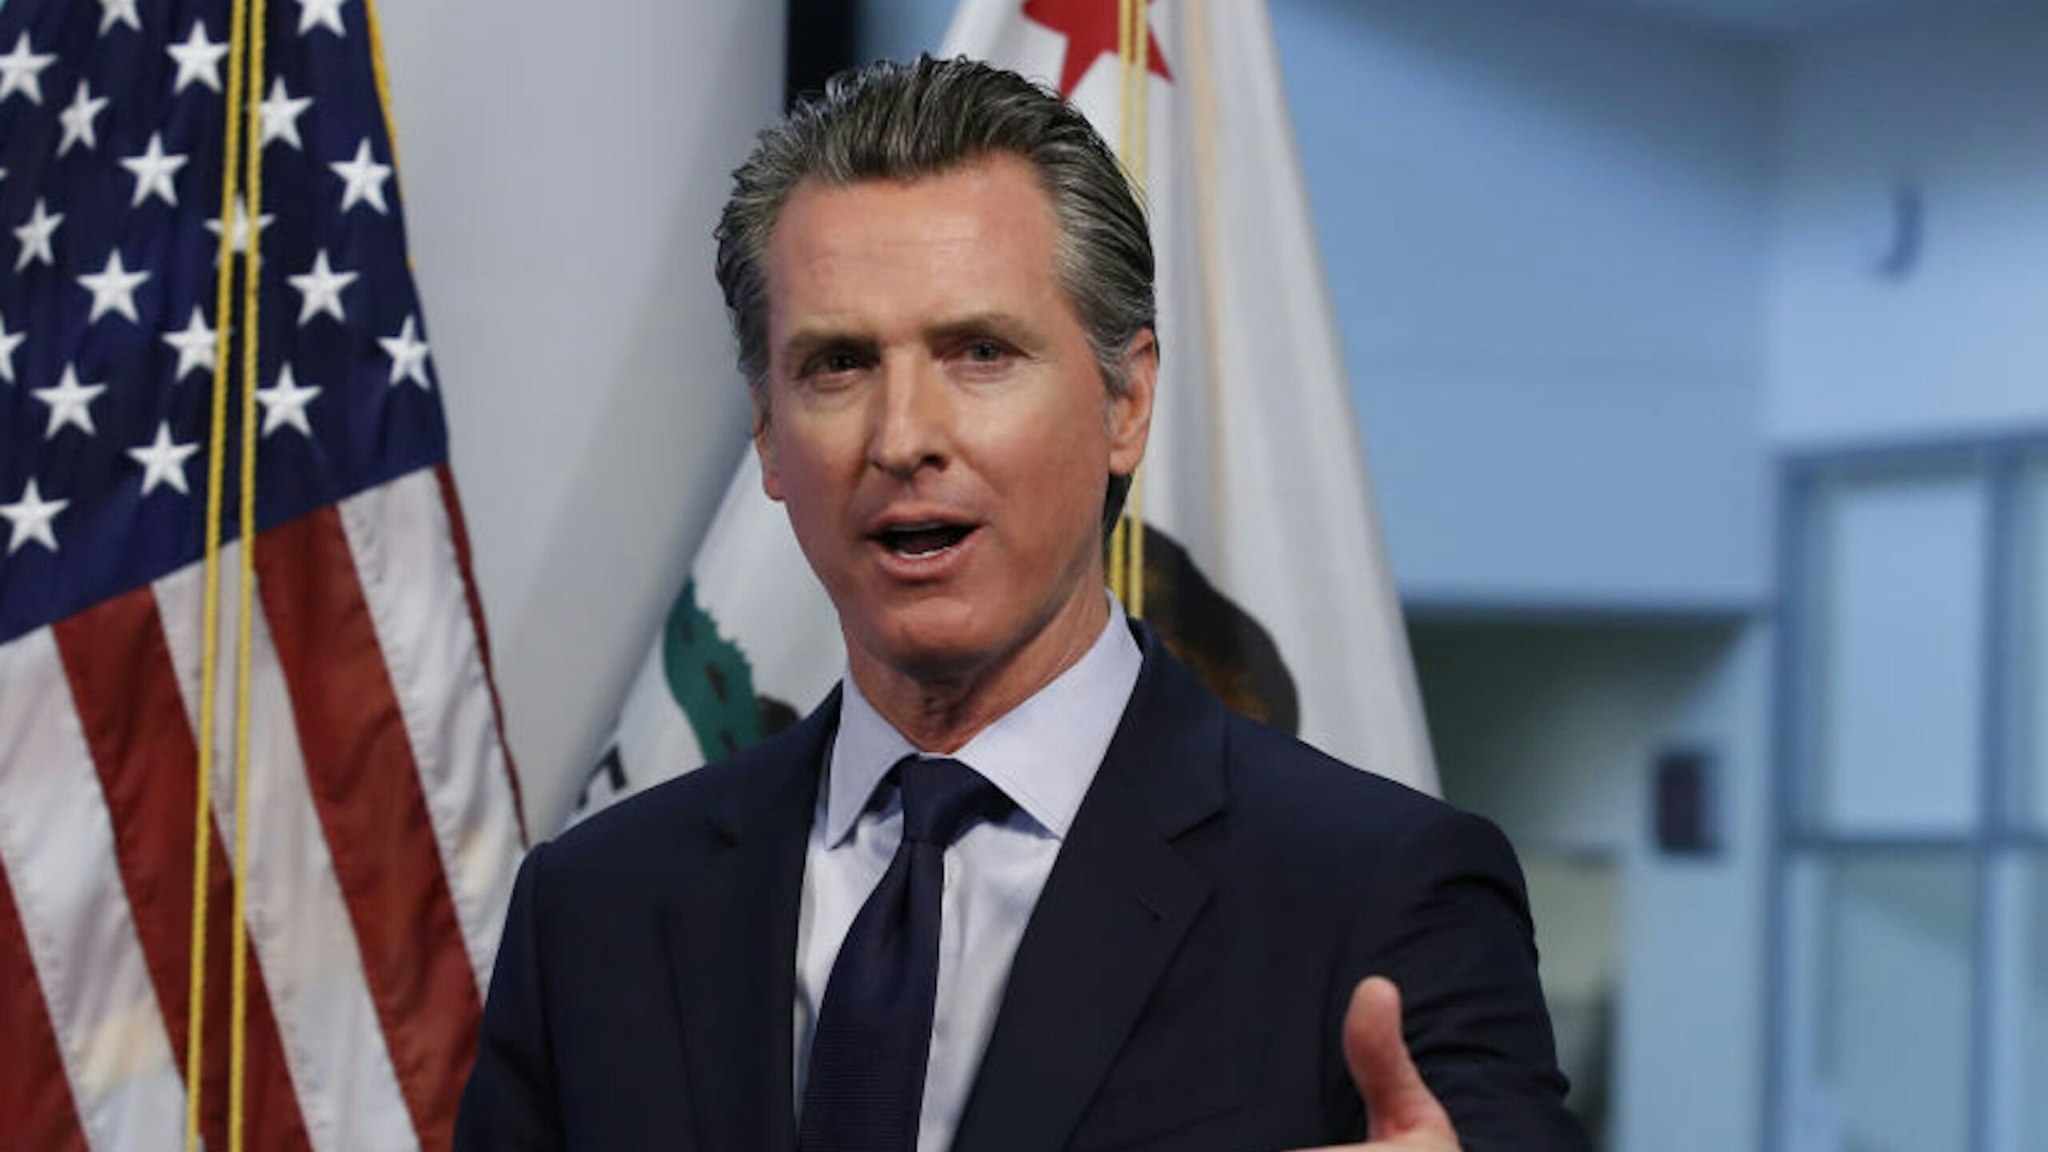 Gavin Newsom, governor of California, speaks during a news conference in Sacramento, California, U.S., on Tuesday, April 14, 2020. Newsom outlined his plan to lift restrictions in the most-populous U.S. state, saying a reopening depends on meeting a series of benchmarks that would remake daily life for 40 million residents.